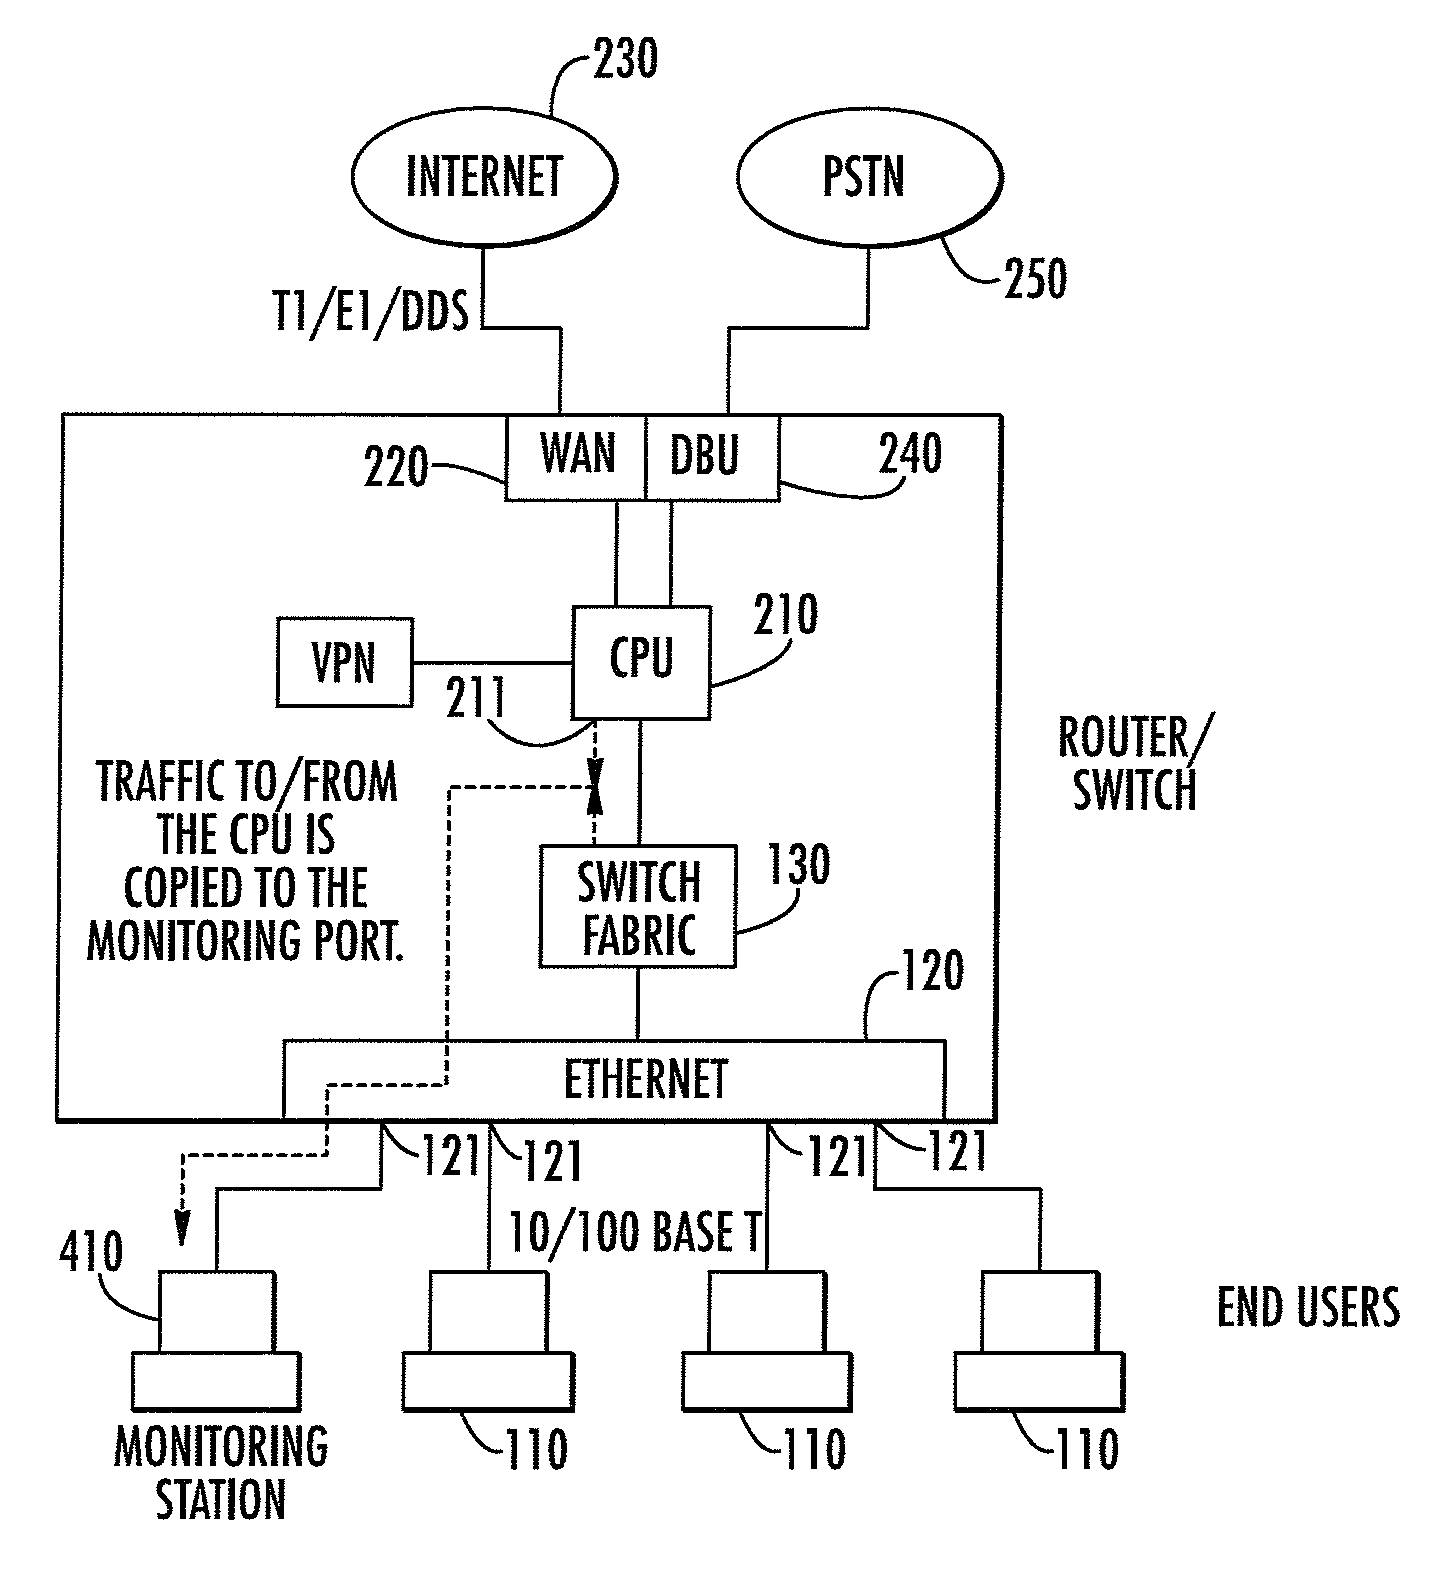 Integrated router switch-based port-mirroring mechanism for monitoring LAN-to-WAN and WAN-to-LAN traffic